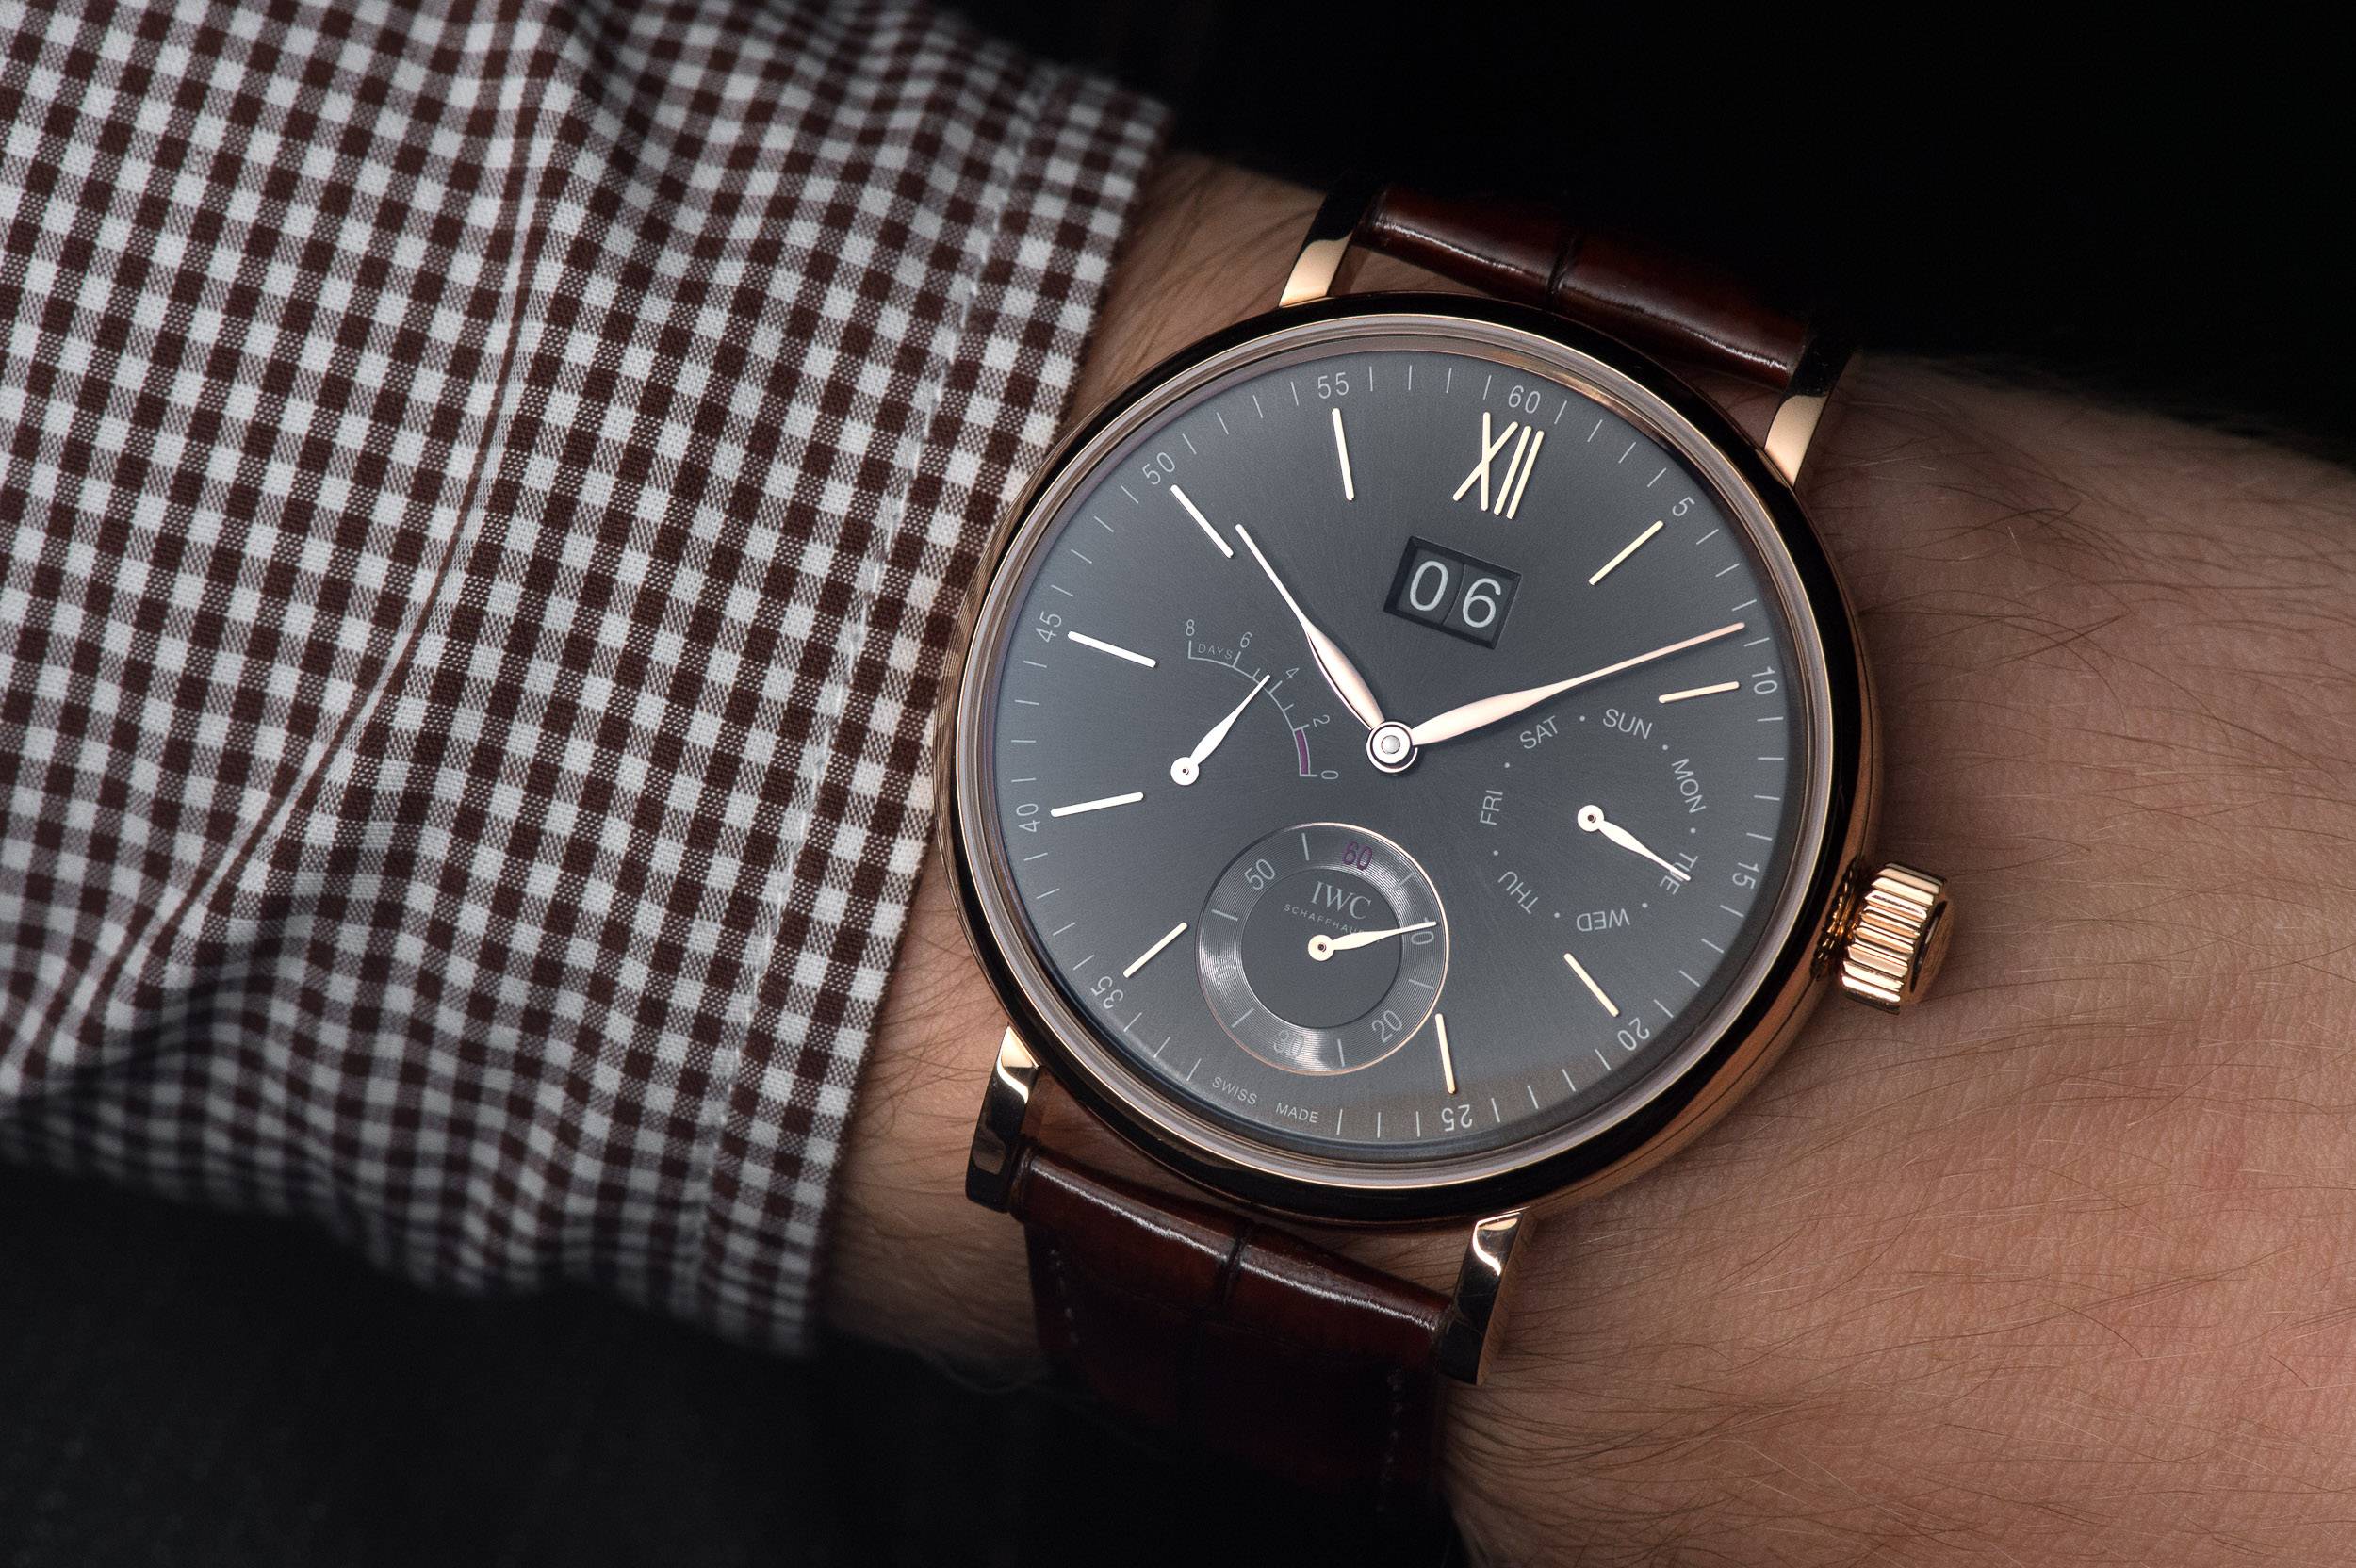 Top 5 Watches From Watches & Wonders 2015